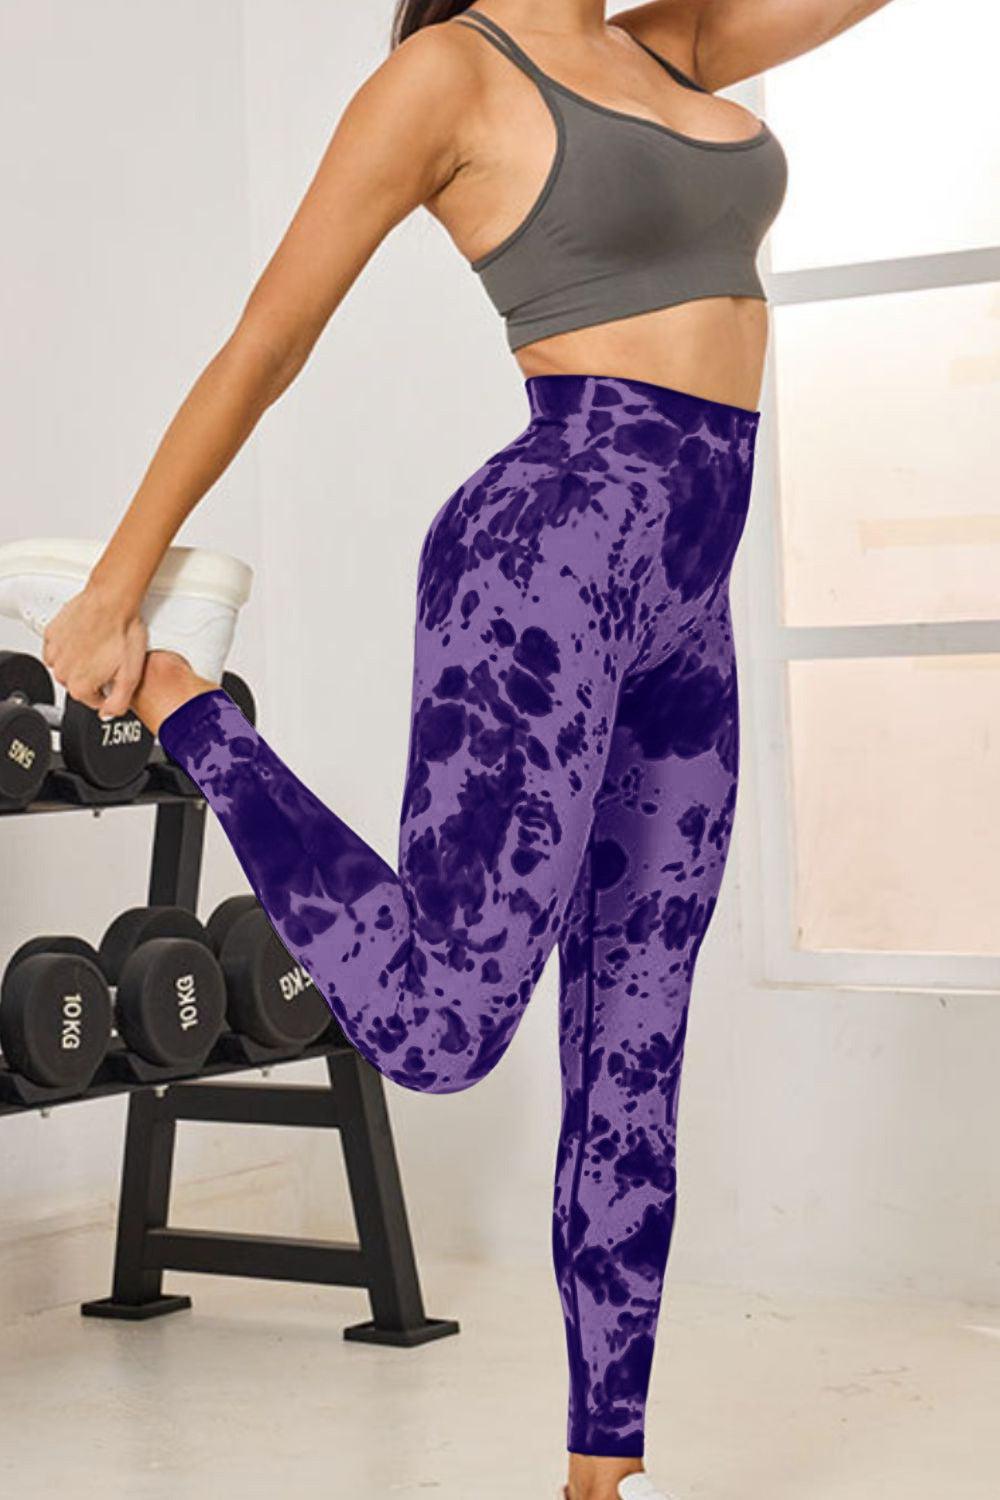 a woman in a sports bra top and purple leggings